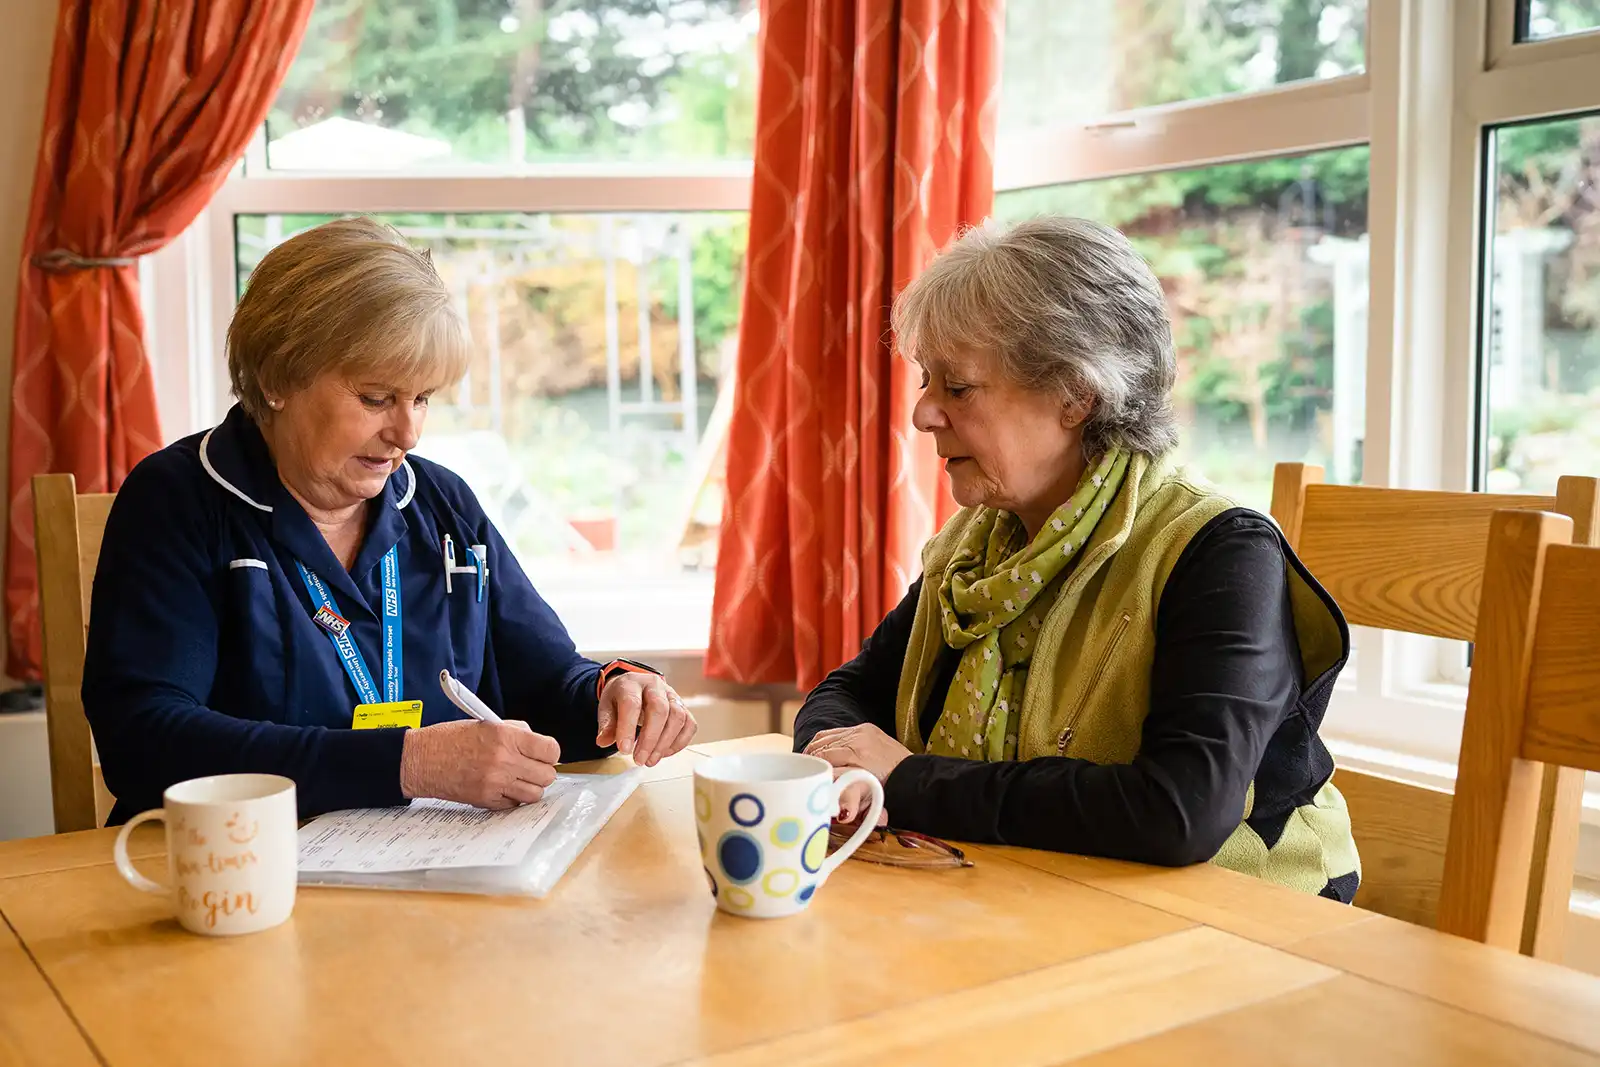 The collaboration is aimed at improving care for patients and their families